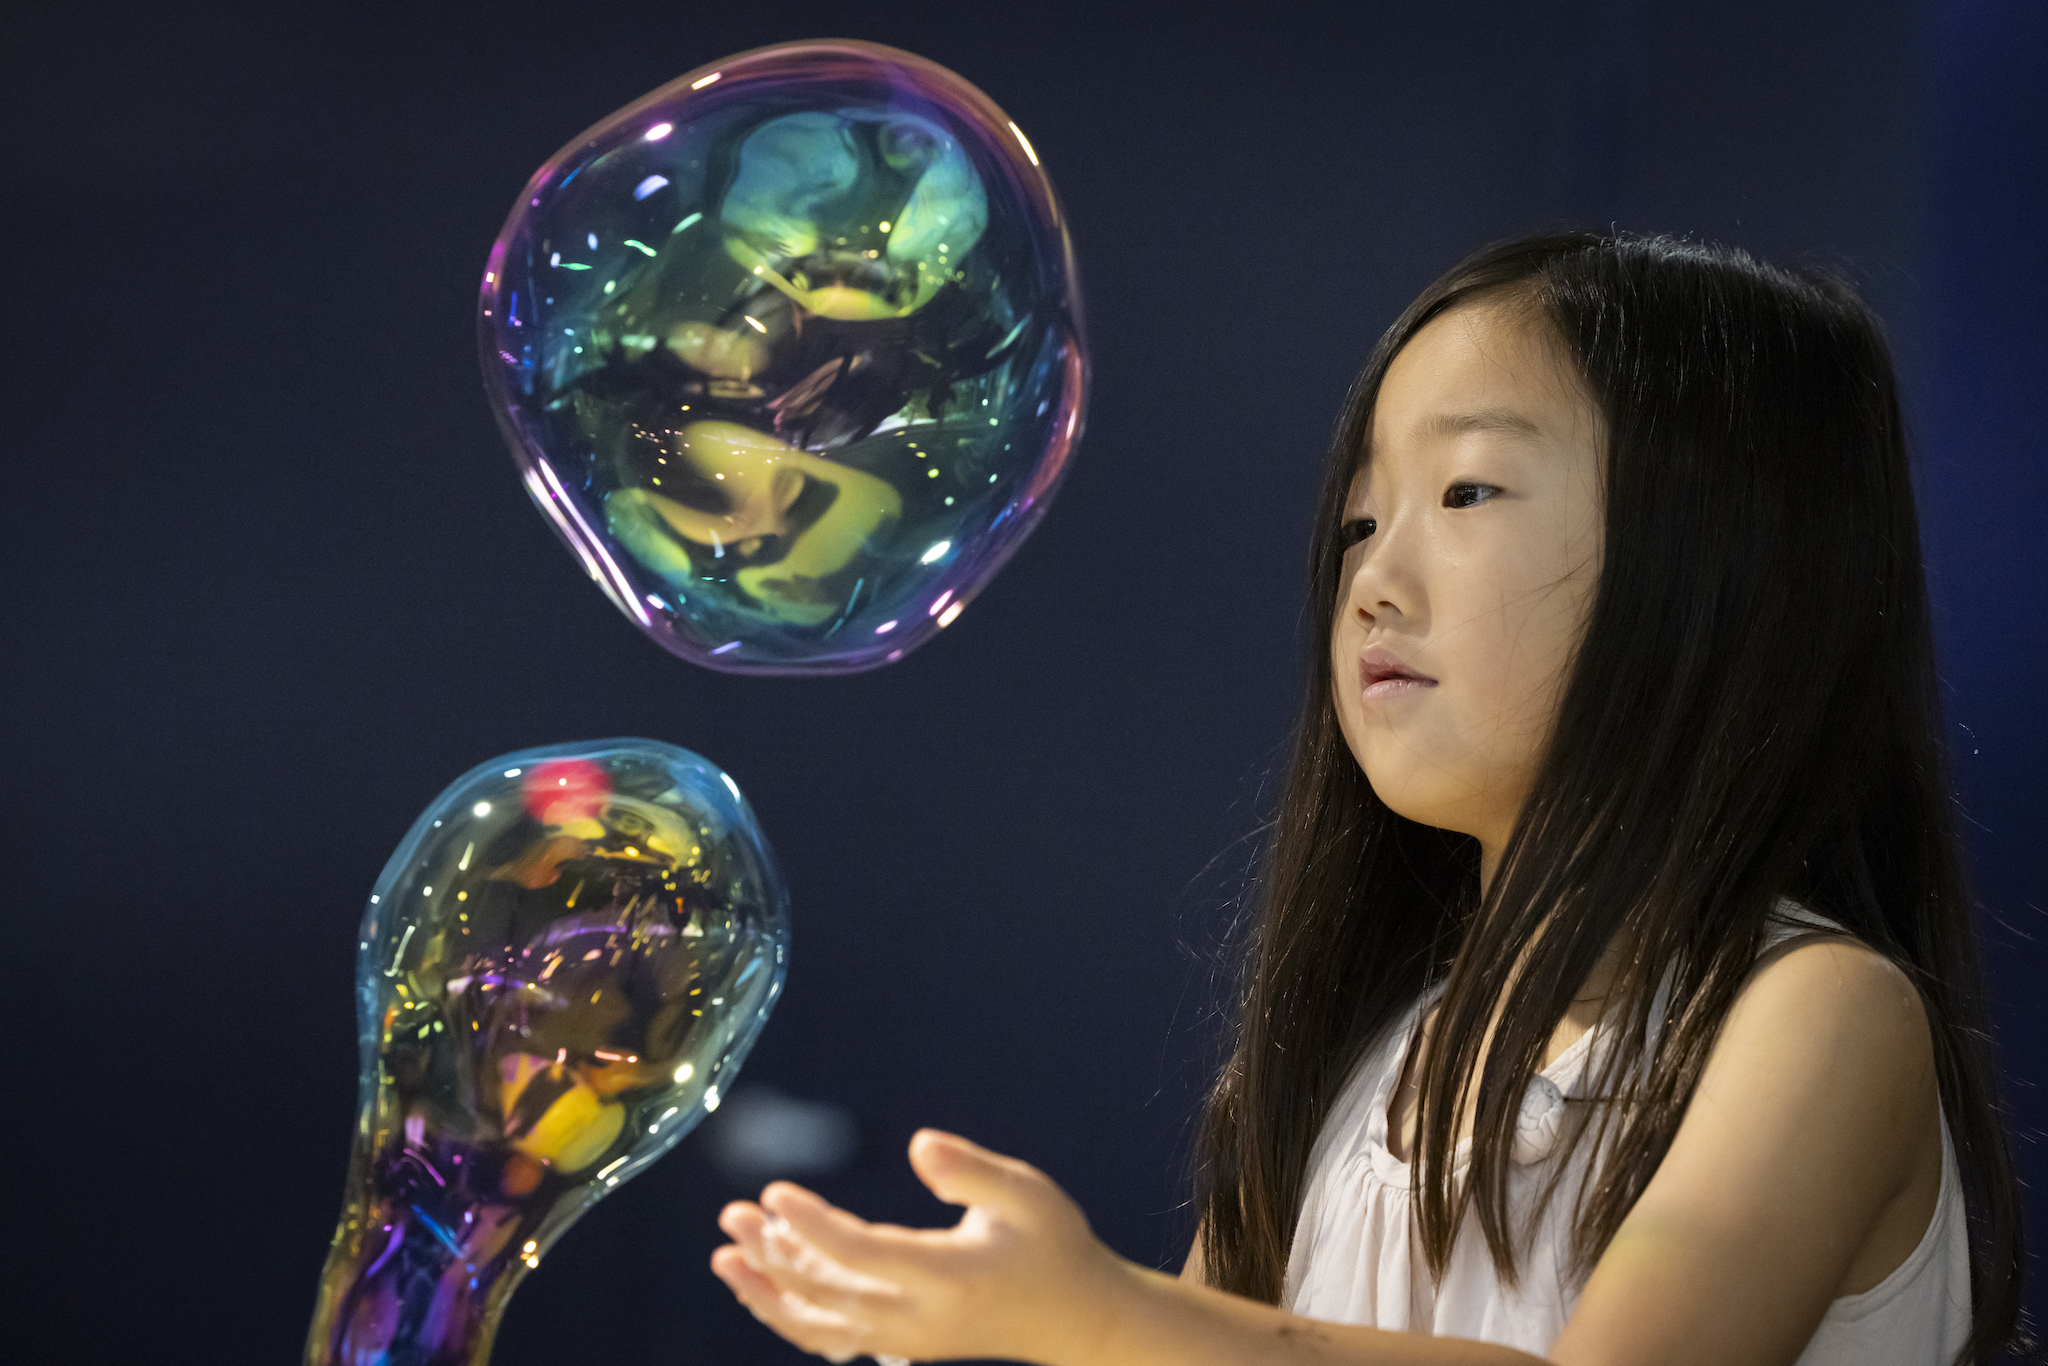 New York Hall of Science is set to open new exhibit The Big Bubble  Experiment